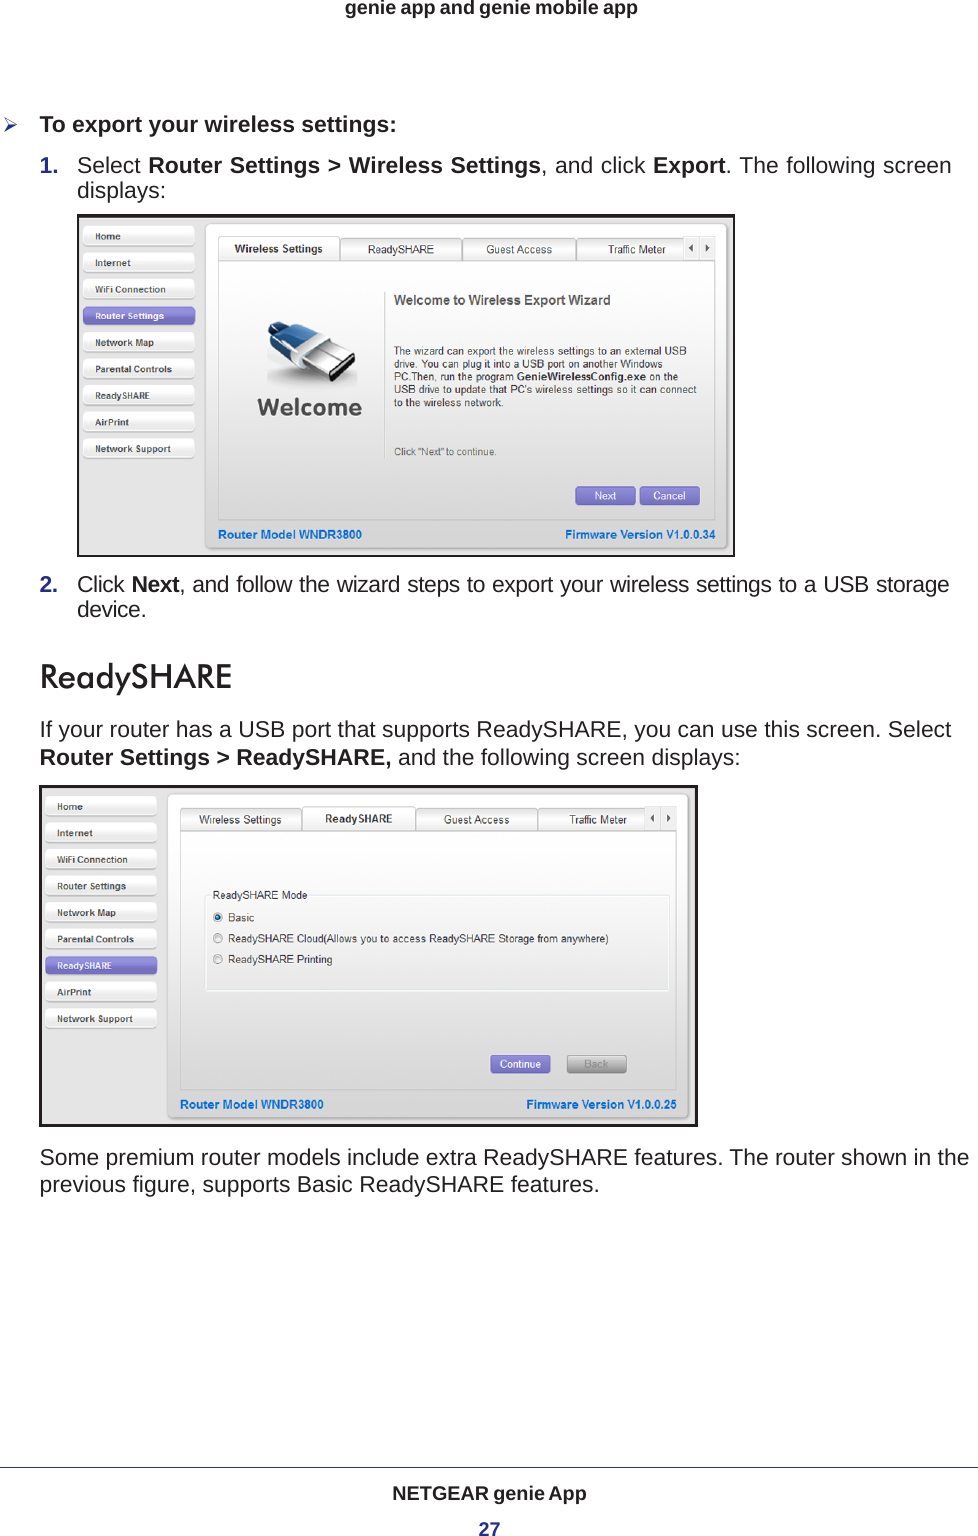 NETGEAR genie App27 genie app and genie mobile appTo export your wireless settings:1.  Select Router Settings &gt; Wireless Settings, and click Export. The following screen displays:2.  Click Next, and follow the wizard steps to export your wireless settings to a USB storage device.ReadySHAREIf your router has a USB port that supports ReadySHARE, you can use this screen. Select Router Settings &gt; ReadySHARE, and the following screen displays:Some premium router models include extra ReadySHARE features. The router shown in the previous figure, supports Basic ReadySHARE features.